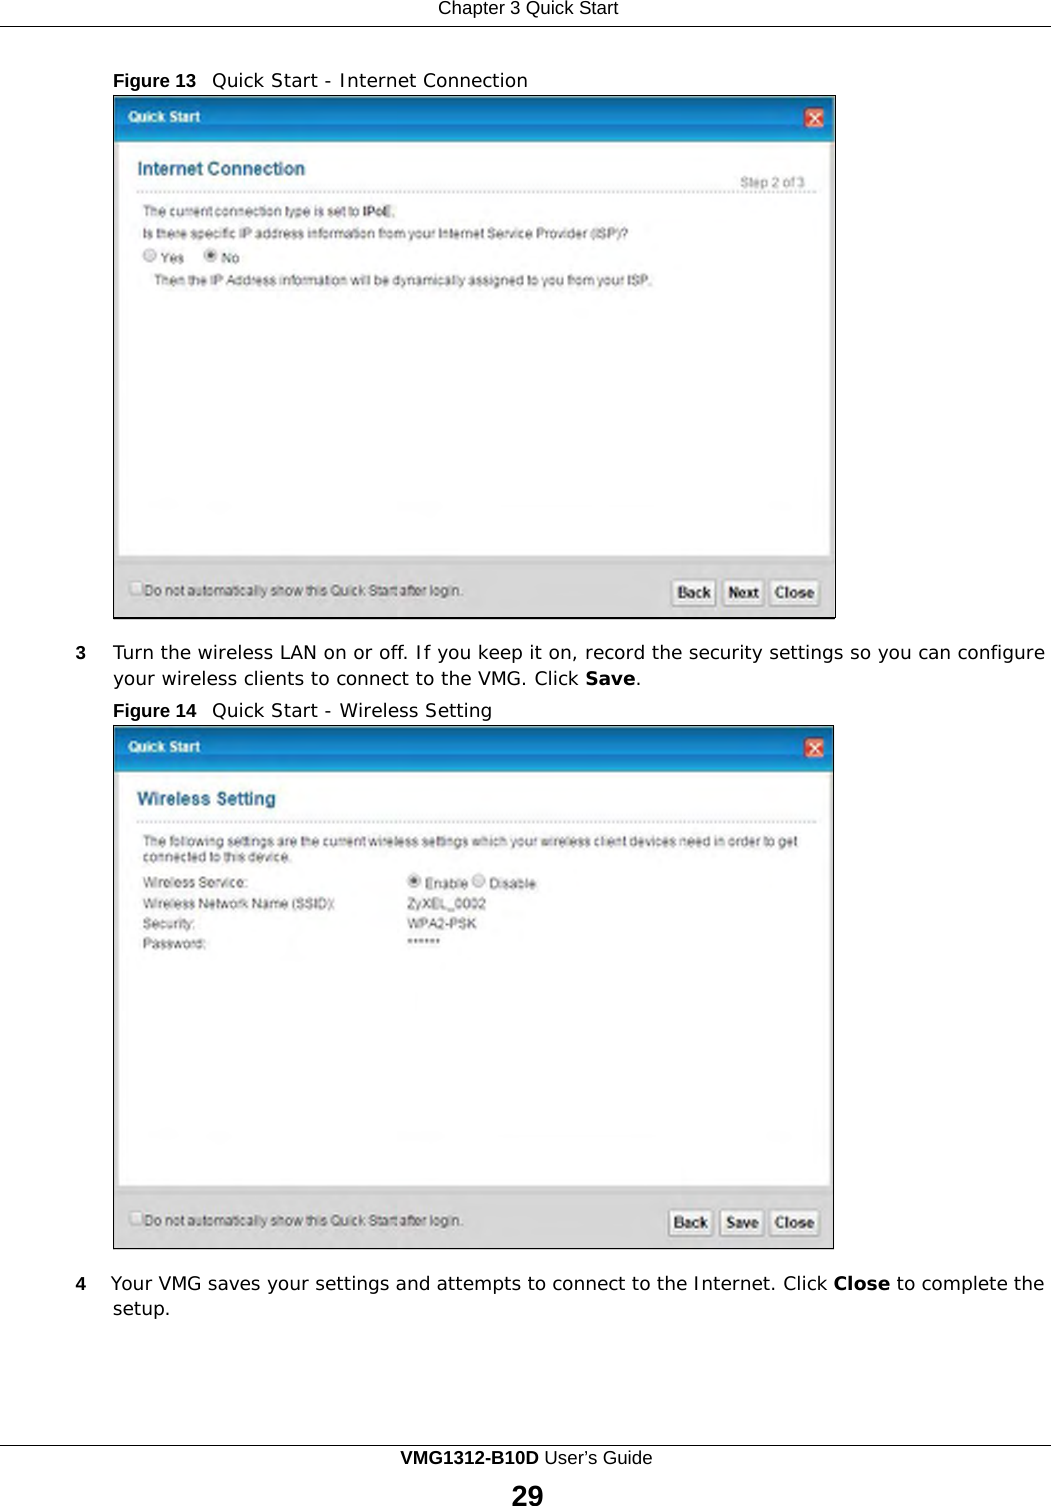 Chapter 3 Quick Start        Figure 13   Quick Start - Internet Connection                           3  Turn the wireless LAN on or off. If you keep it on, record the security settings so you can configure your wireless clients to connect to the VMG. Click Save. Figure 14   Quick Start - Wireless Setting                           4  Your VMG saves your settings and attempts to connect to the Internet. Click Close to complete the setup. VMG1312-B10D User’s Guide 29  